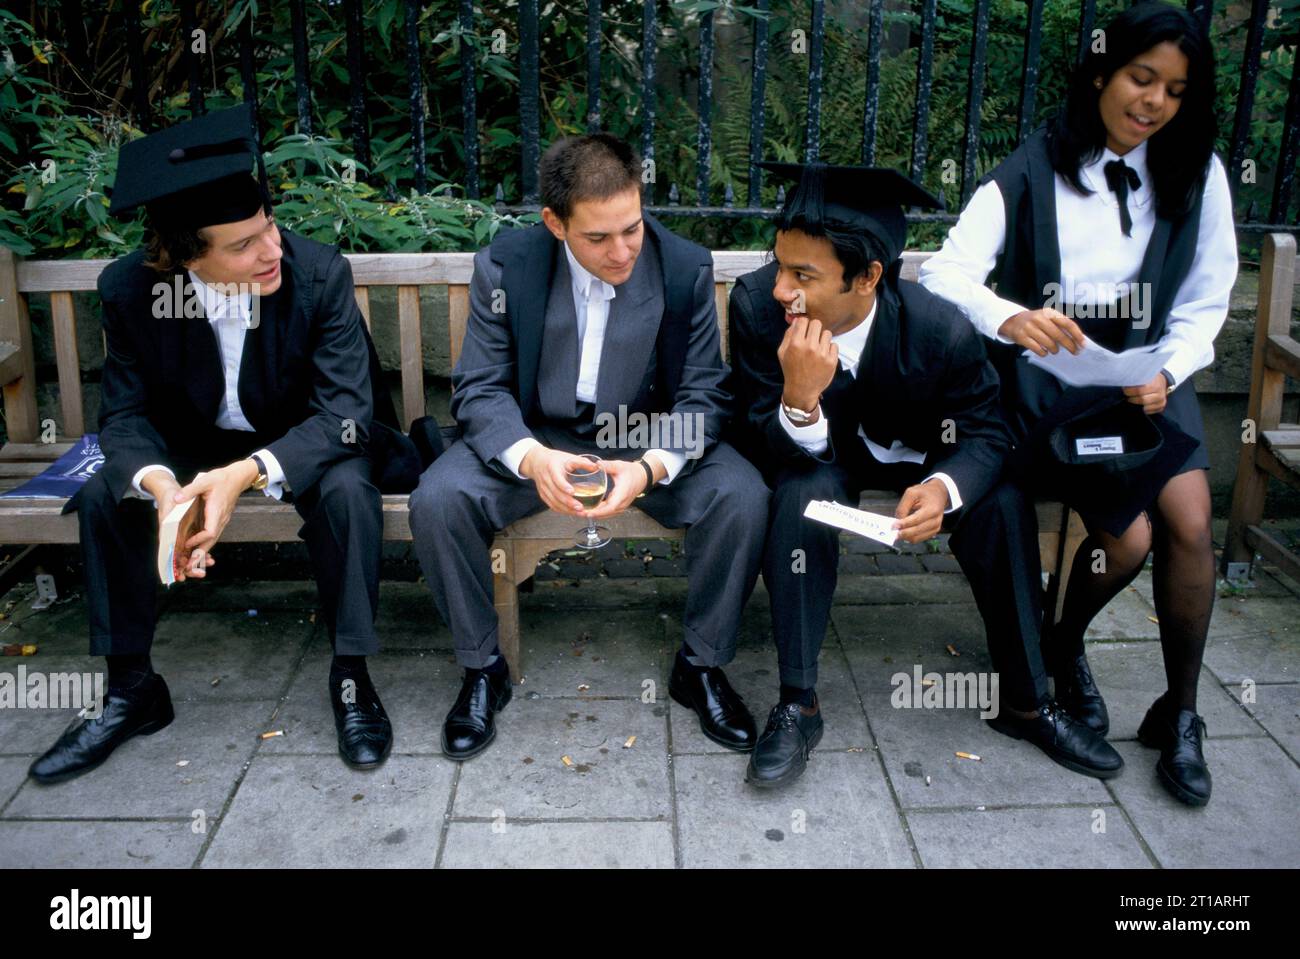 Freshers Week, Oxford University students after matriculation and wearing subfusc, which is a requirement for formal enrolment, students chatting together outside Kings Arms pub. Oxford, Oxfordshire, England circa September 1990s. 1995 UK HOMER SYKES Stock Photo